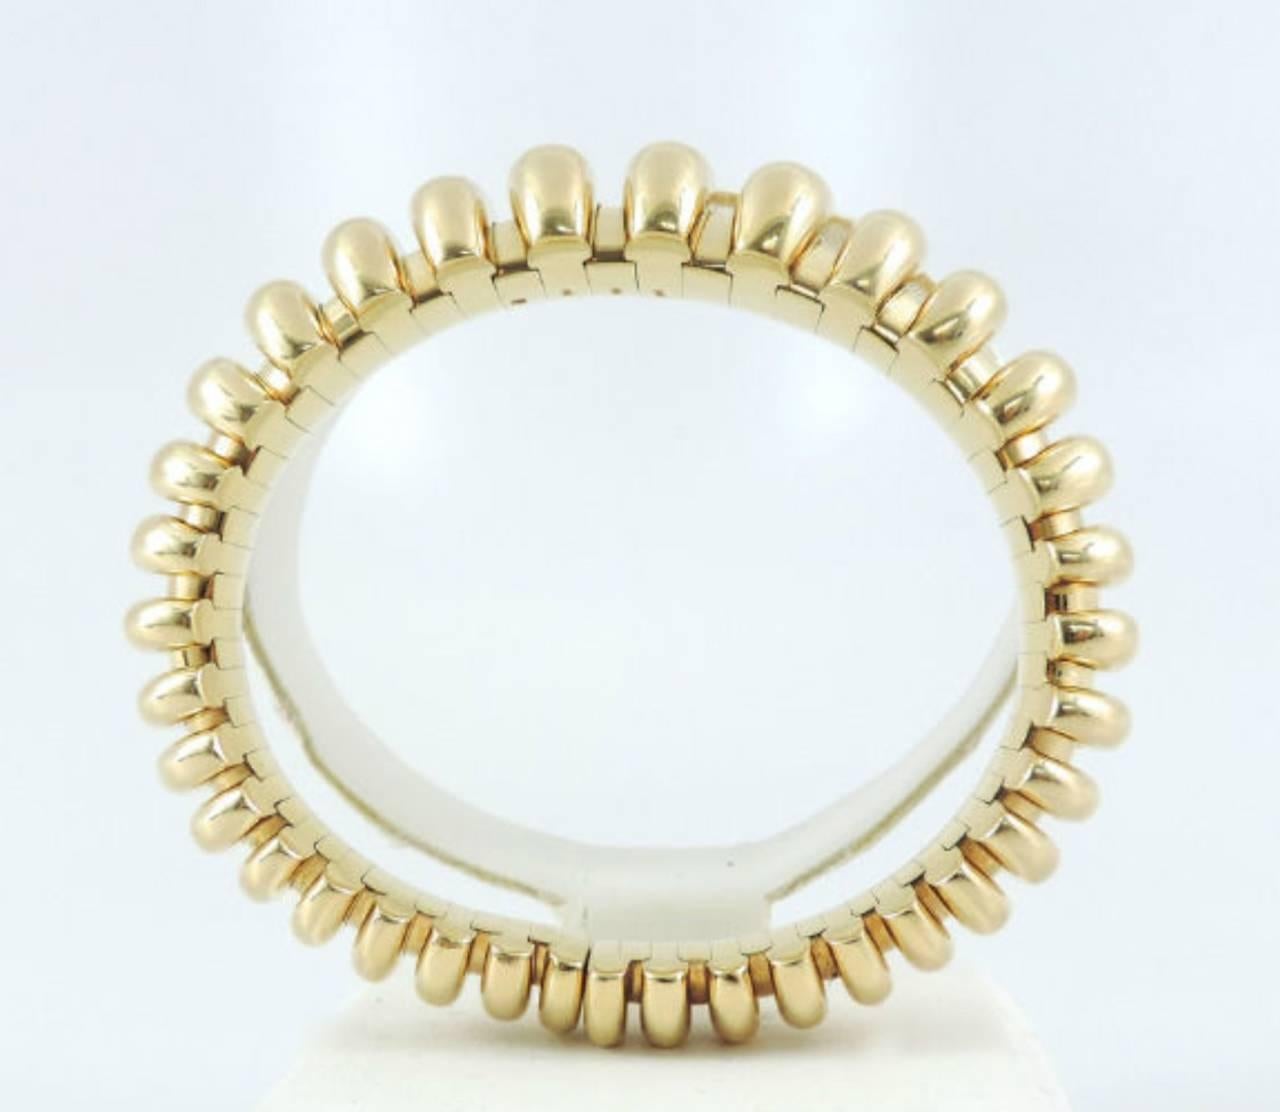 This is an authentic Bvlgari Celtaura 18k, heavy yellow gold flexible cuff bracelet. Fully signed and hallmarked, solid 18k gold, oval bangle that opens to fit 7 inch wrist and smaller. 12mm wide at bottom and 17.50mm at top.  In excellent